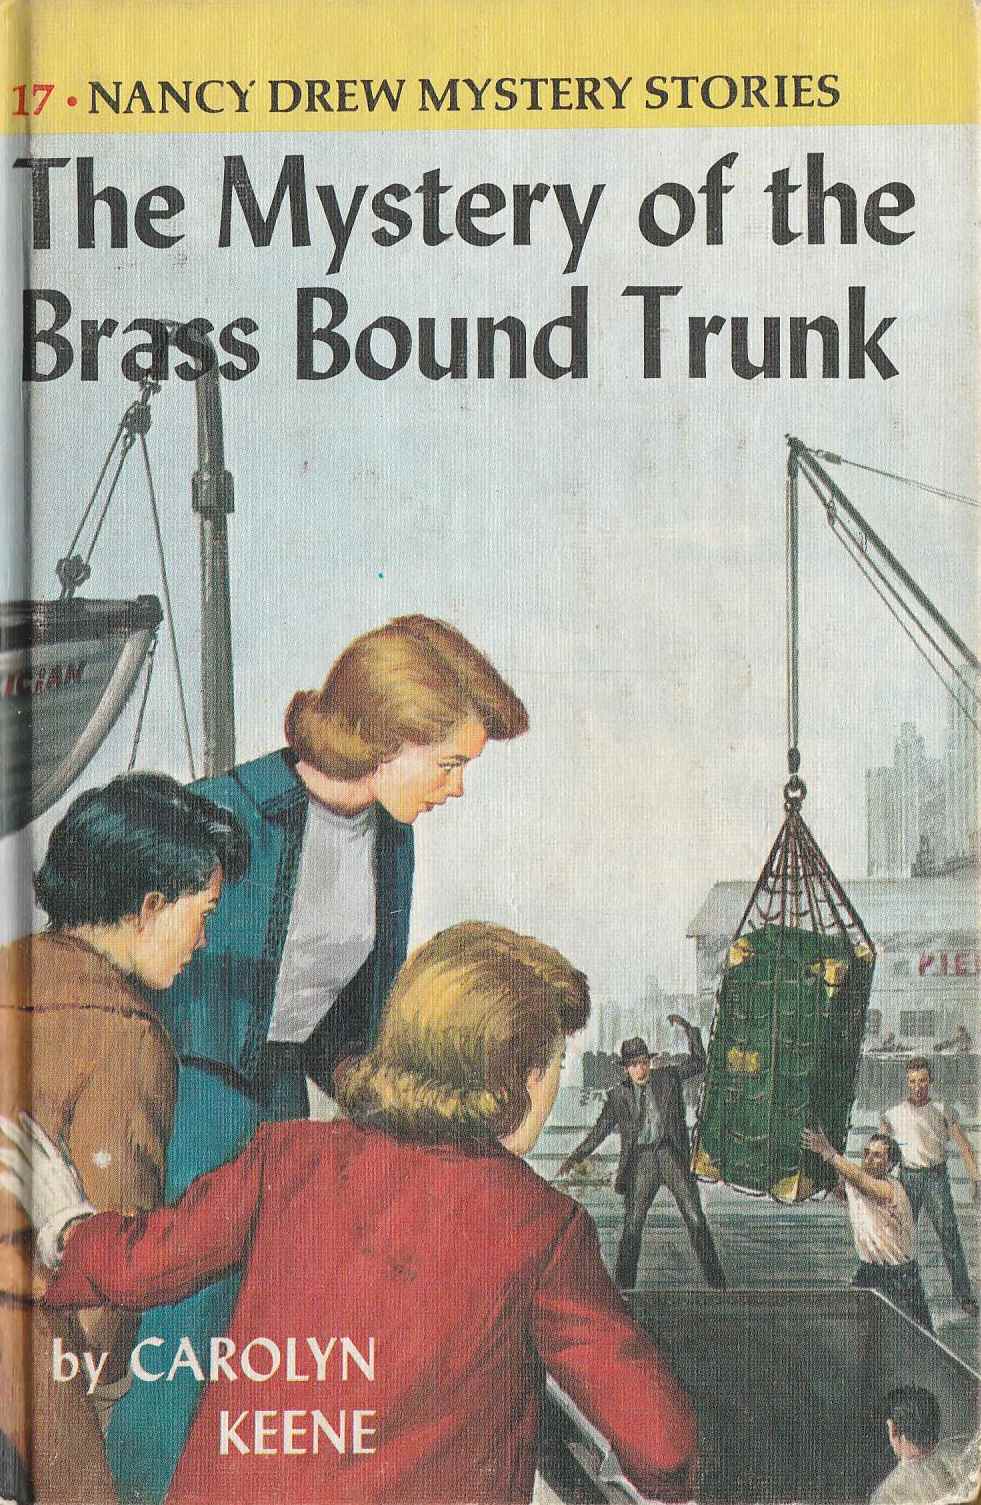 The Mystery of the Brass Bound Trunk